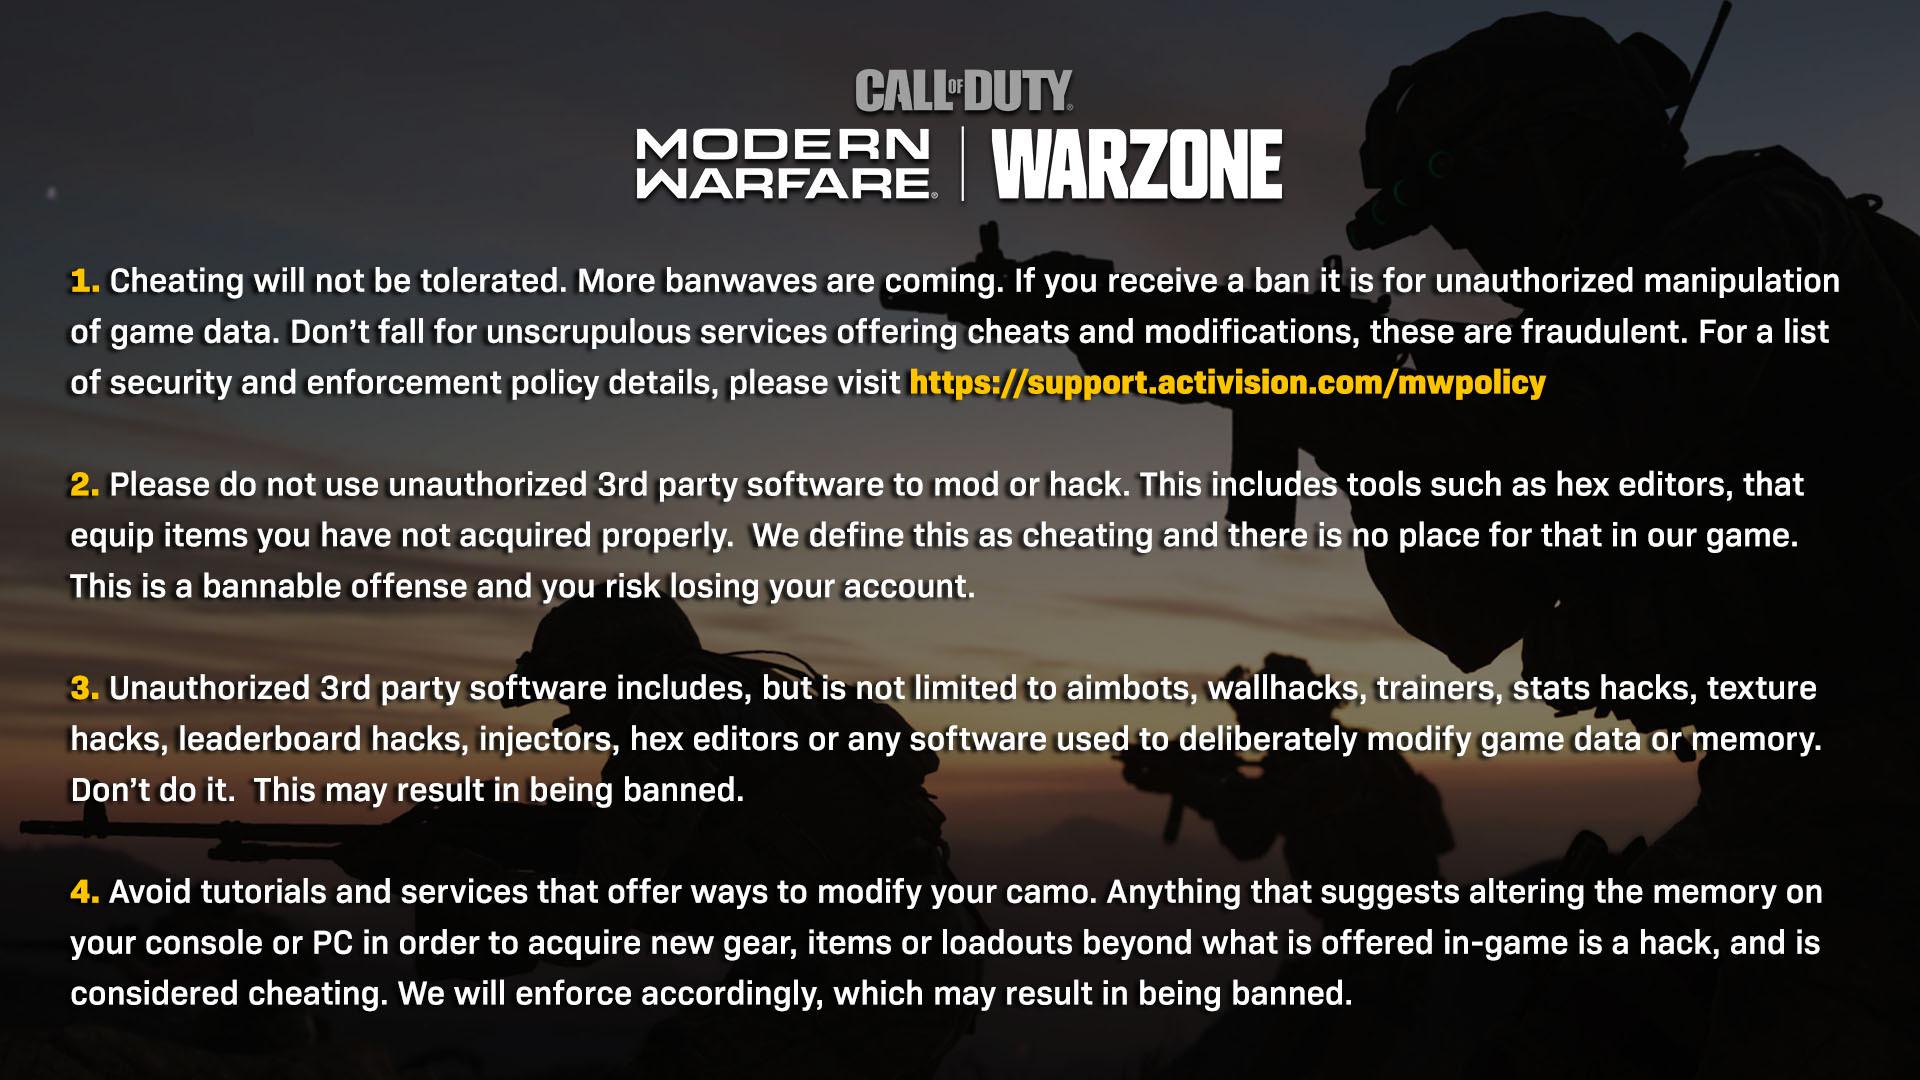 Infinity Ward's response to hackers in Warzone.